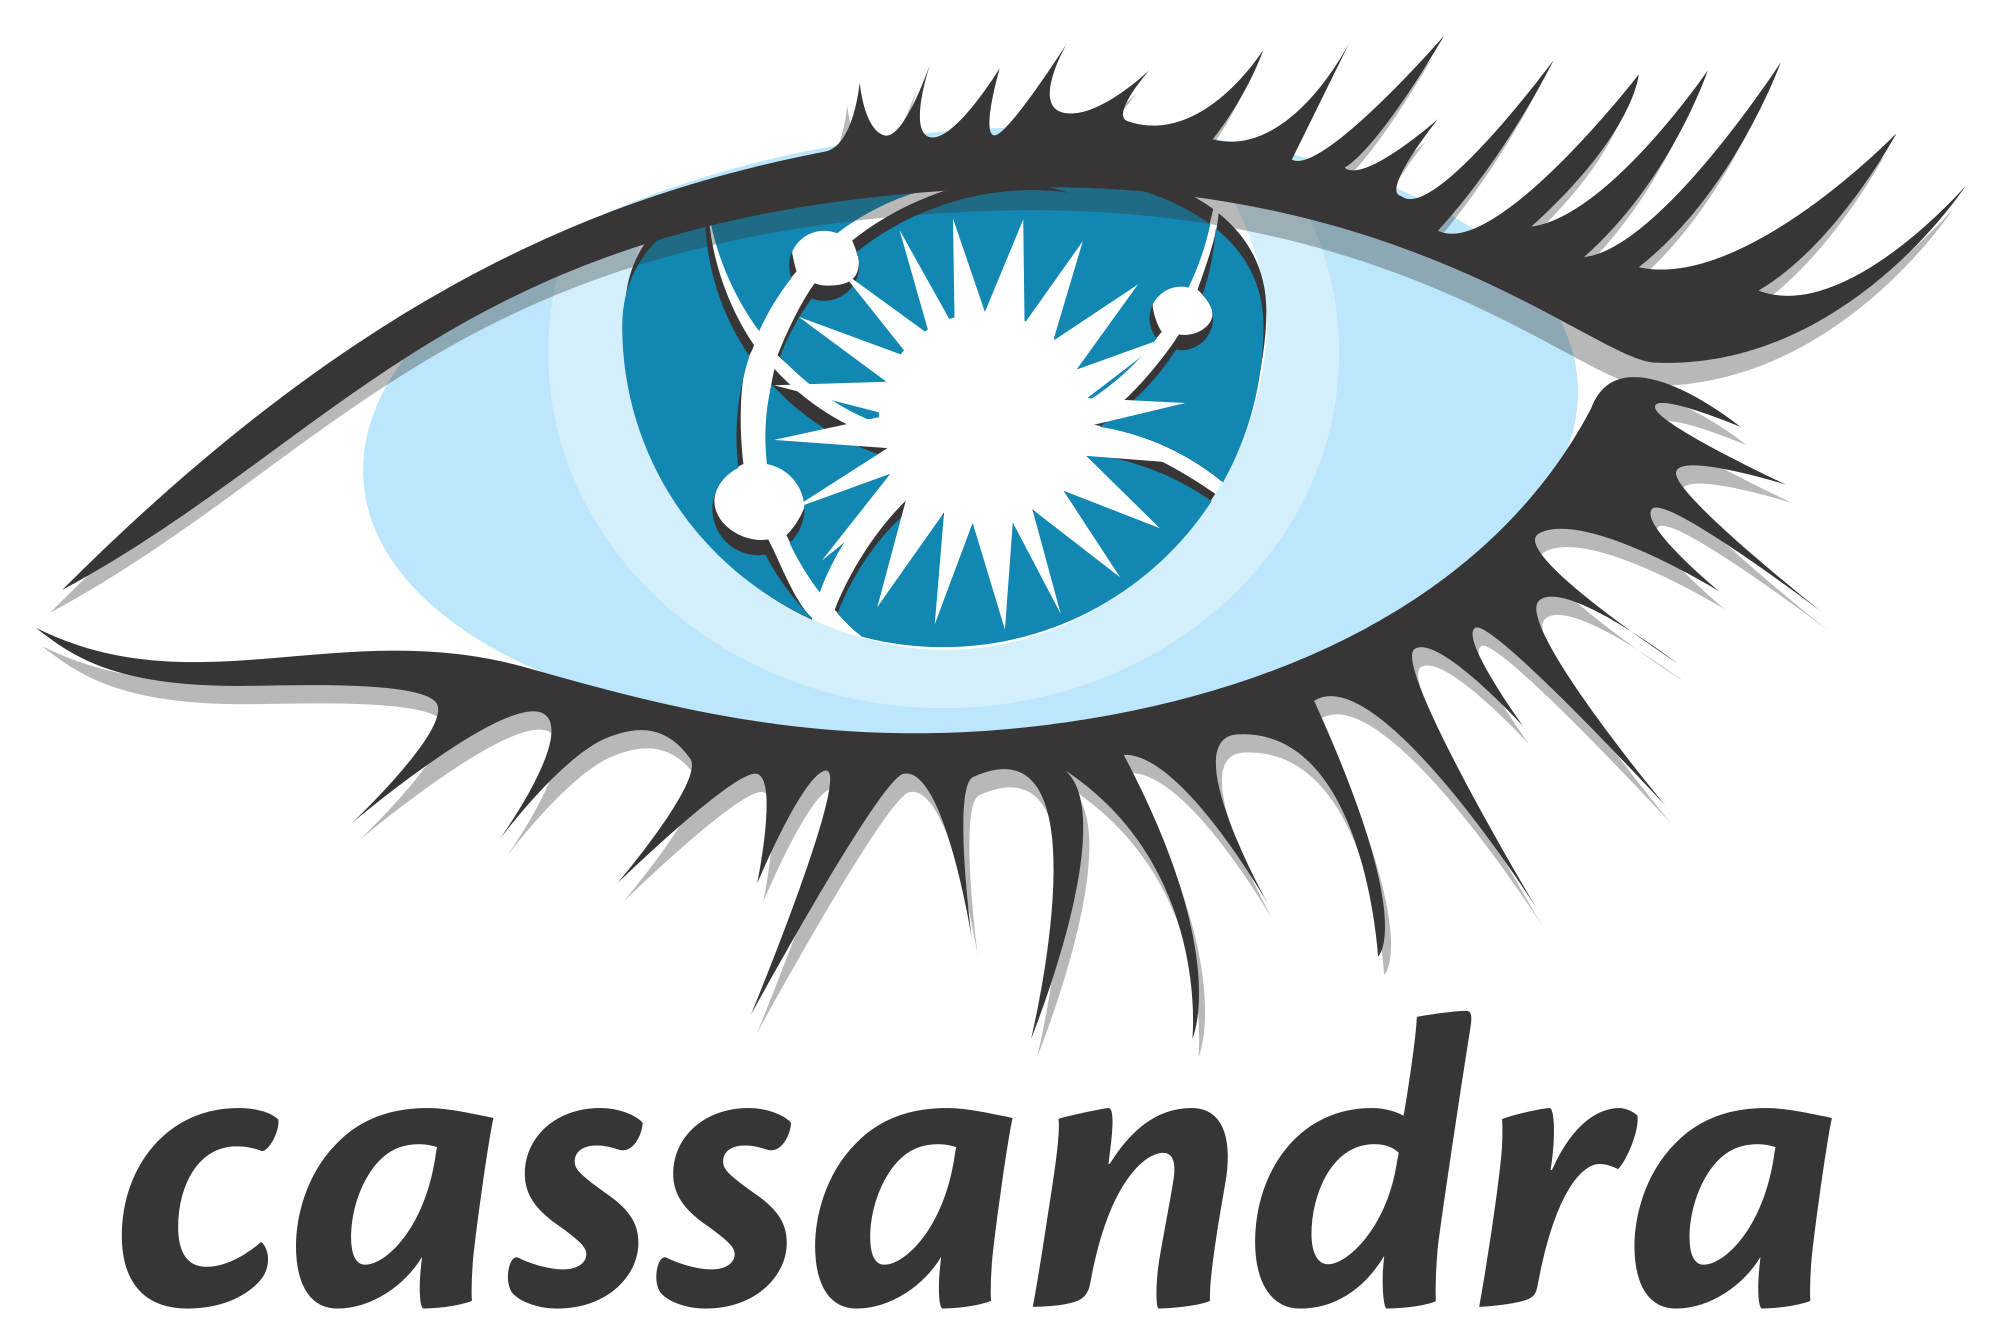 Scale-it-to-Billions-—-What-They-Dont-Tell-you-in-the-Cassandra-README